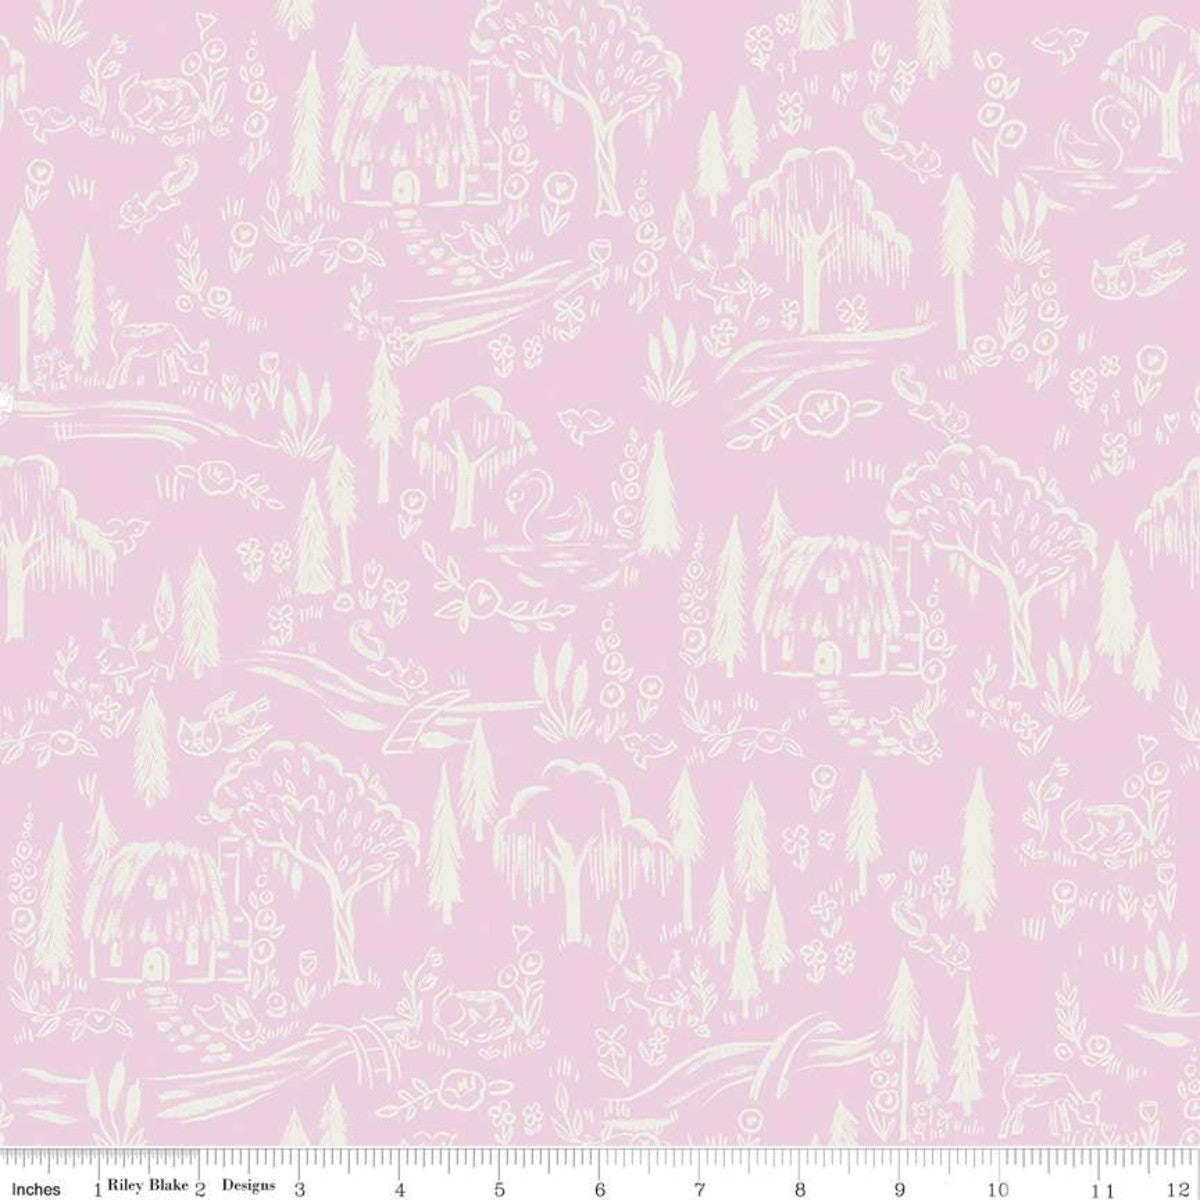 Manufacturer: Riley Blake Designs Designer: Jill Howarth Collection: Little Brier Rose Print Name: Woodland in Pink Material: 100% Cotton  Weight: Quilting  SKU: C11074-PINK